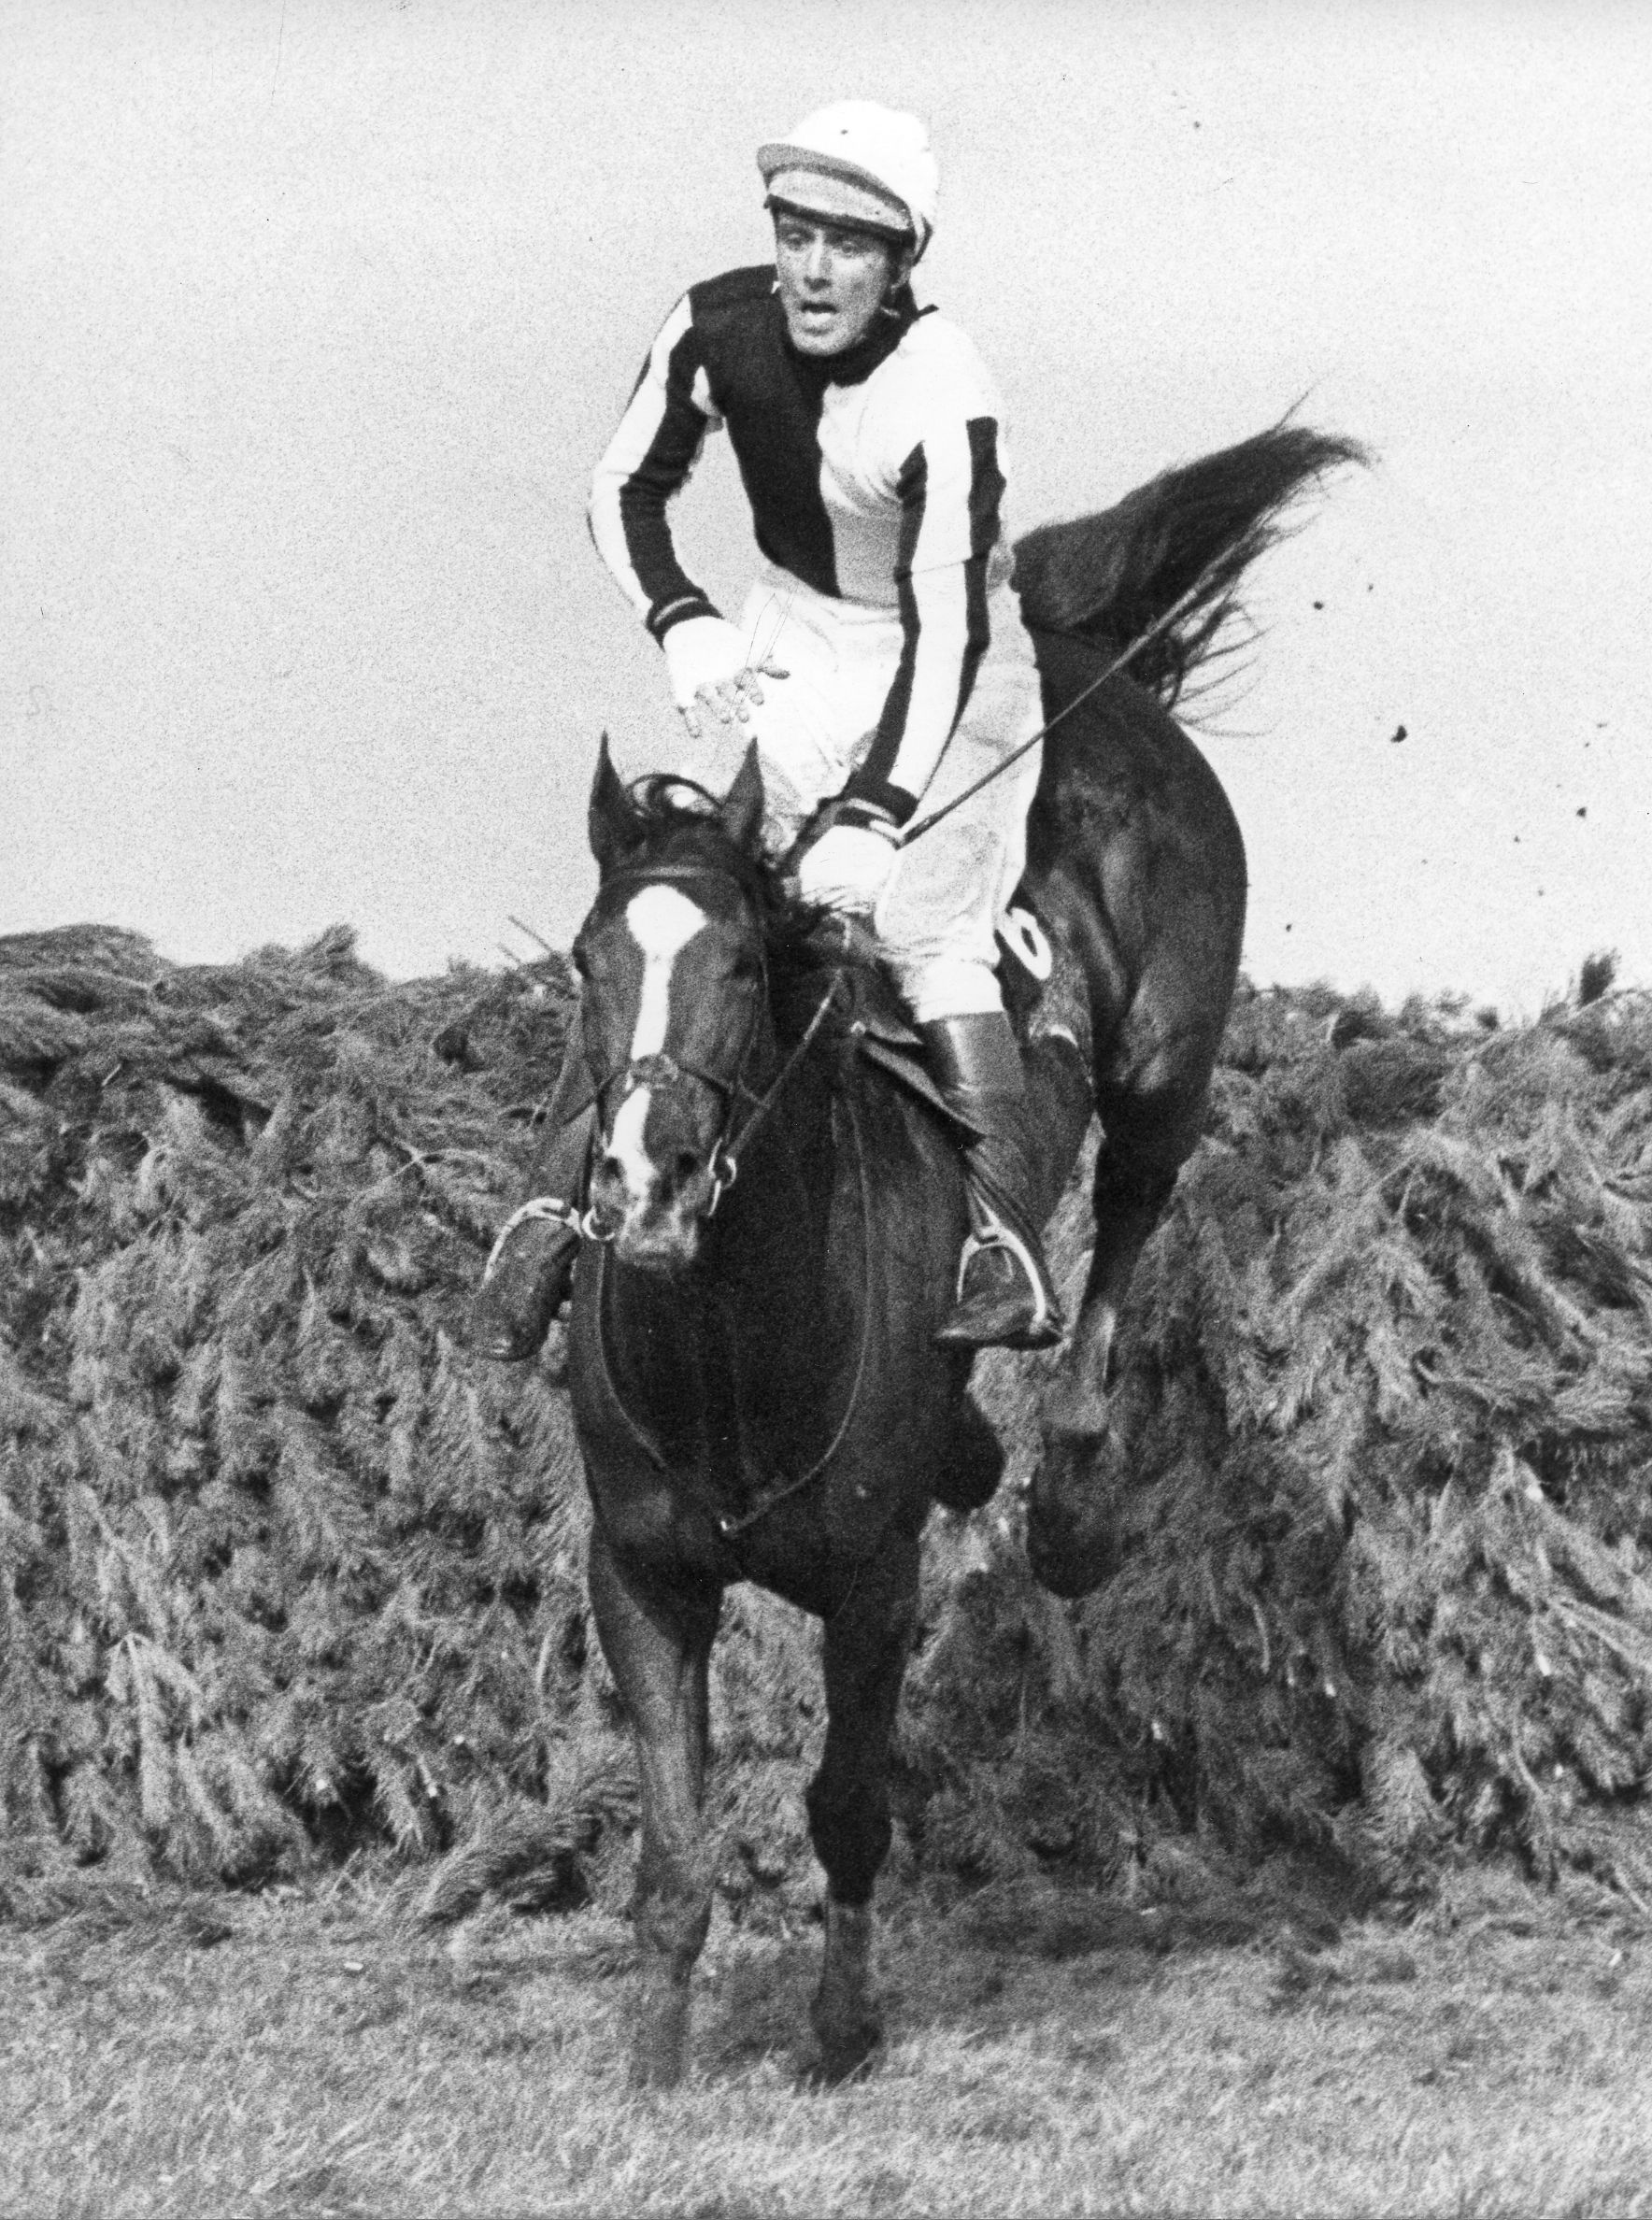 Ben Nevis II with Charles Fenwick, Jr., up at the 1980 English Grand National (Douglas Lees)